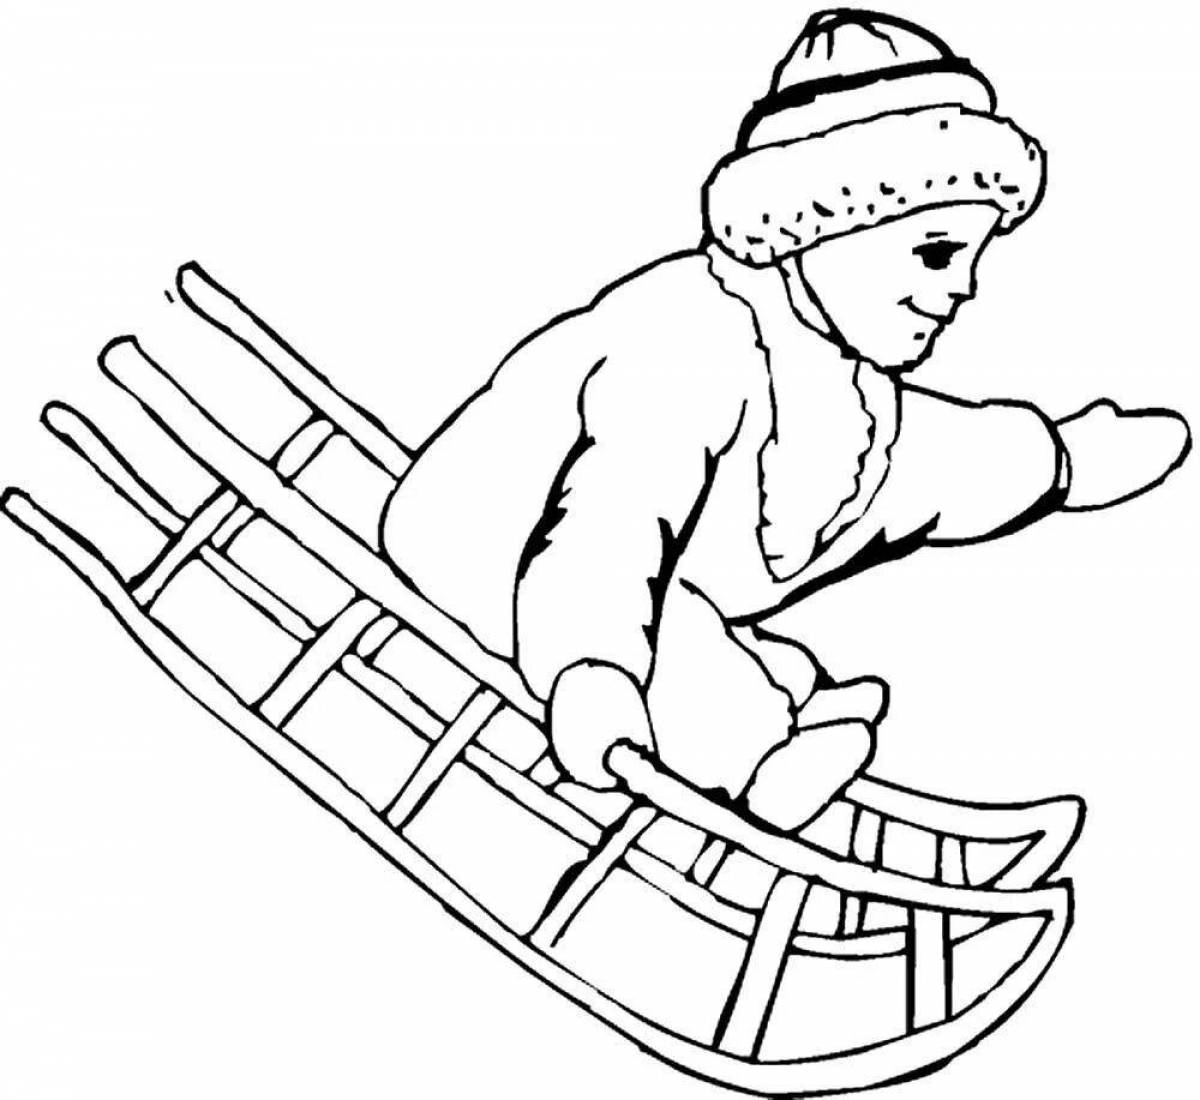 Amazing snow slide coloring page